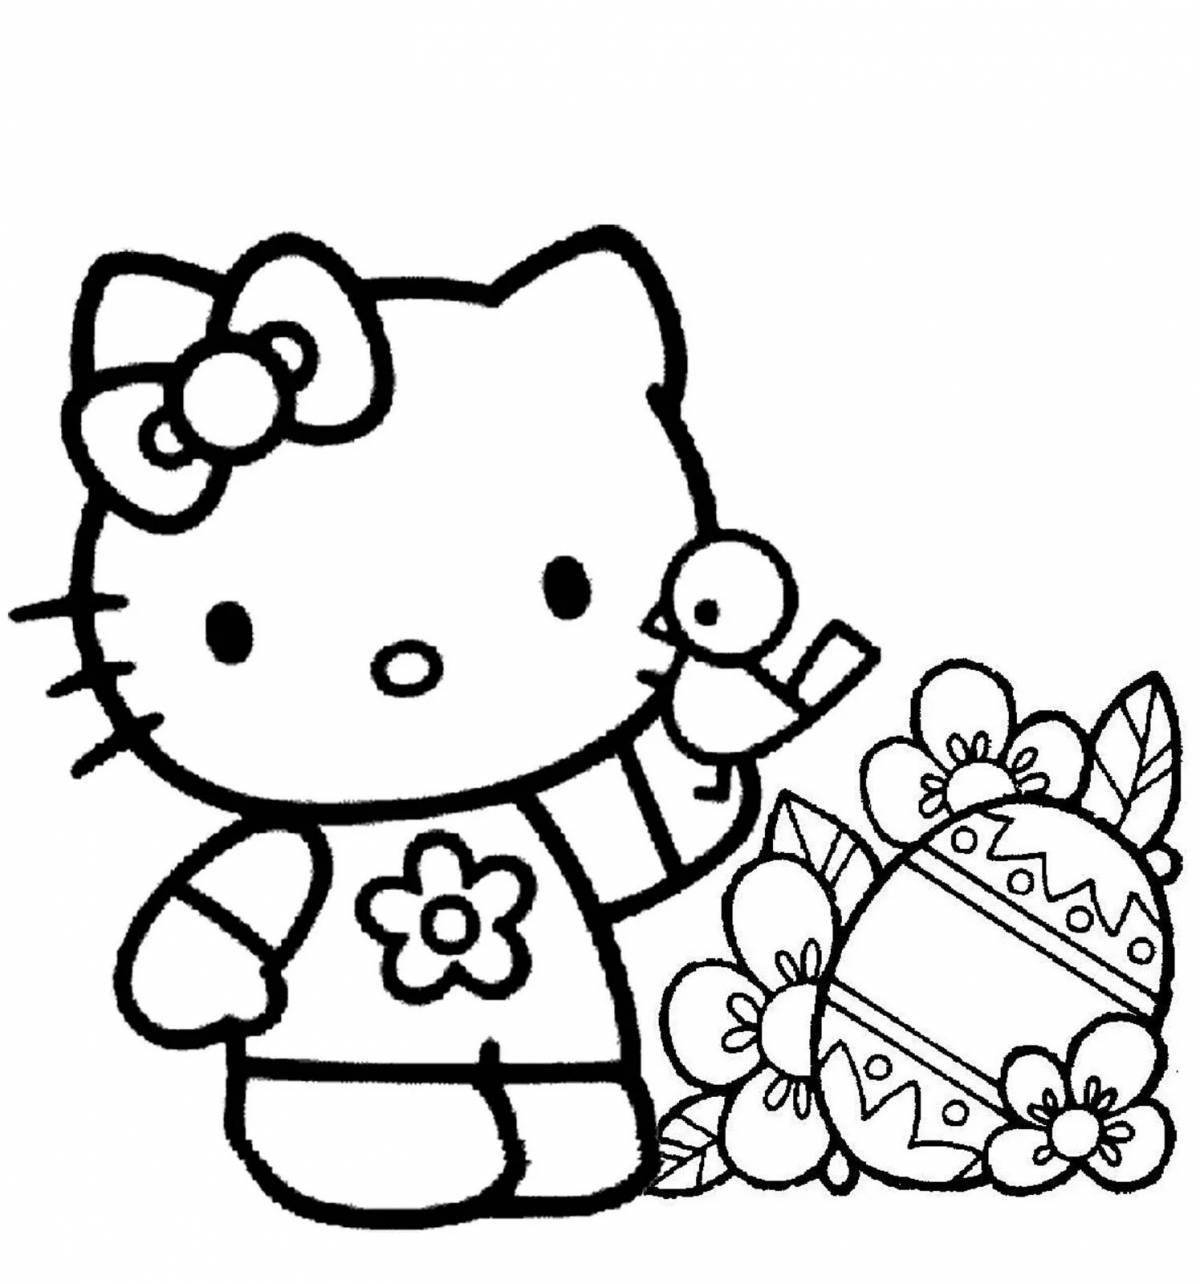 Blissful hello kitty face coloring page